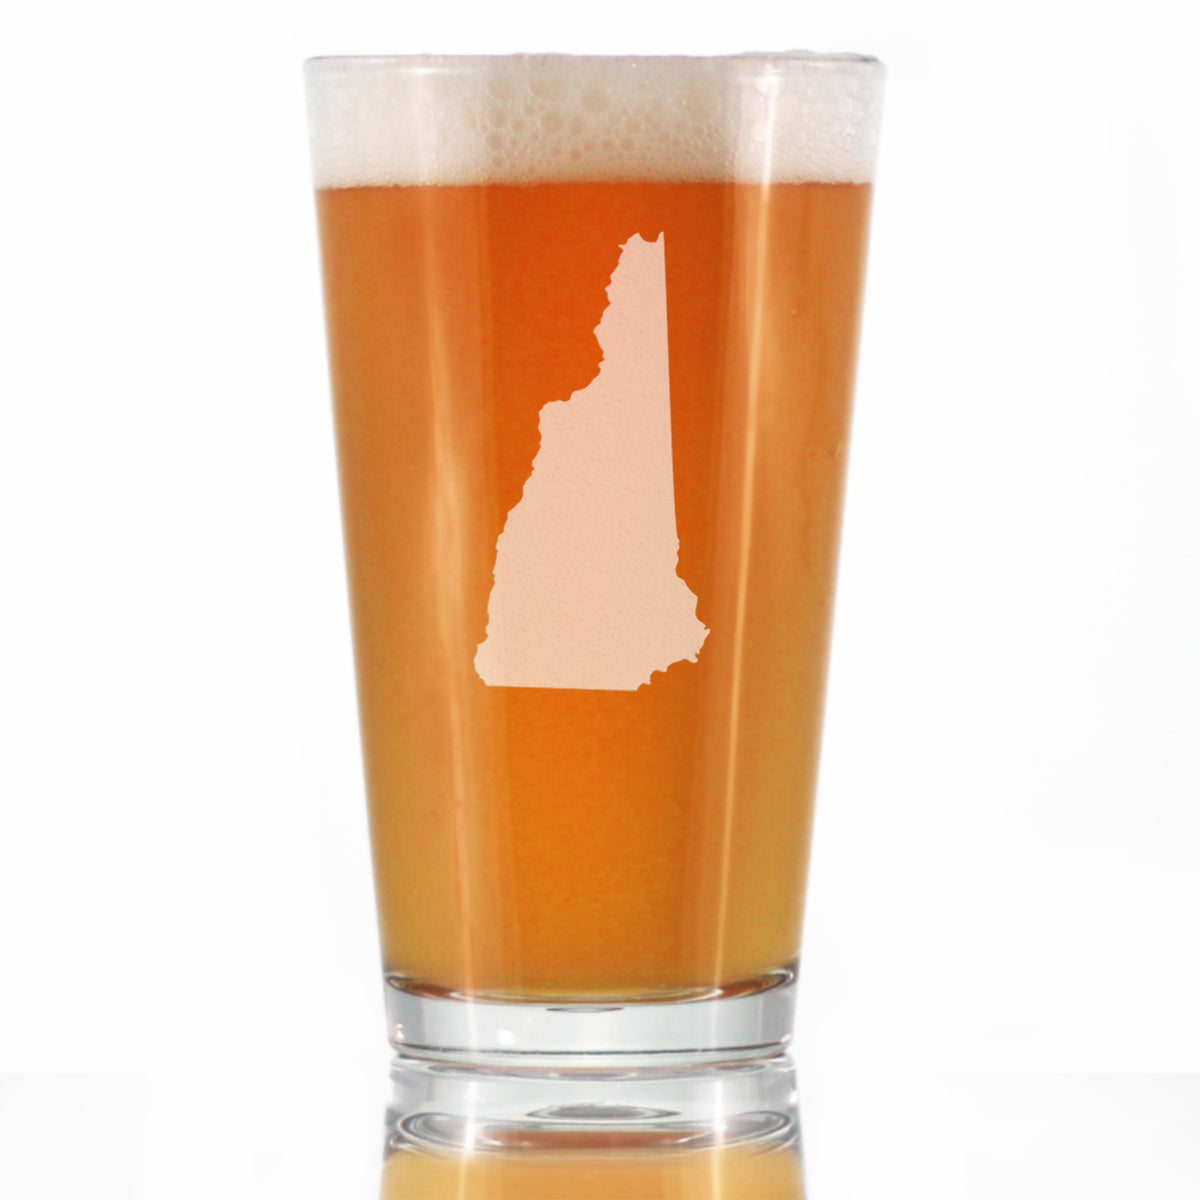 New Hampshire State Outline Pint Glass for Beer - State Themed Drinking Decor and Gifts for New Hampshirite Women &amp; Men - 16 Oz Glasses